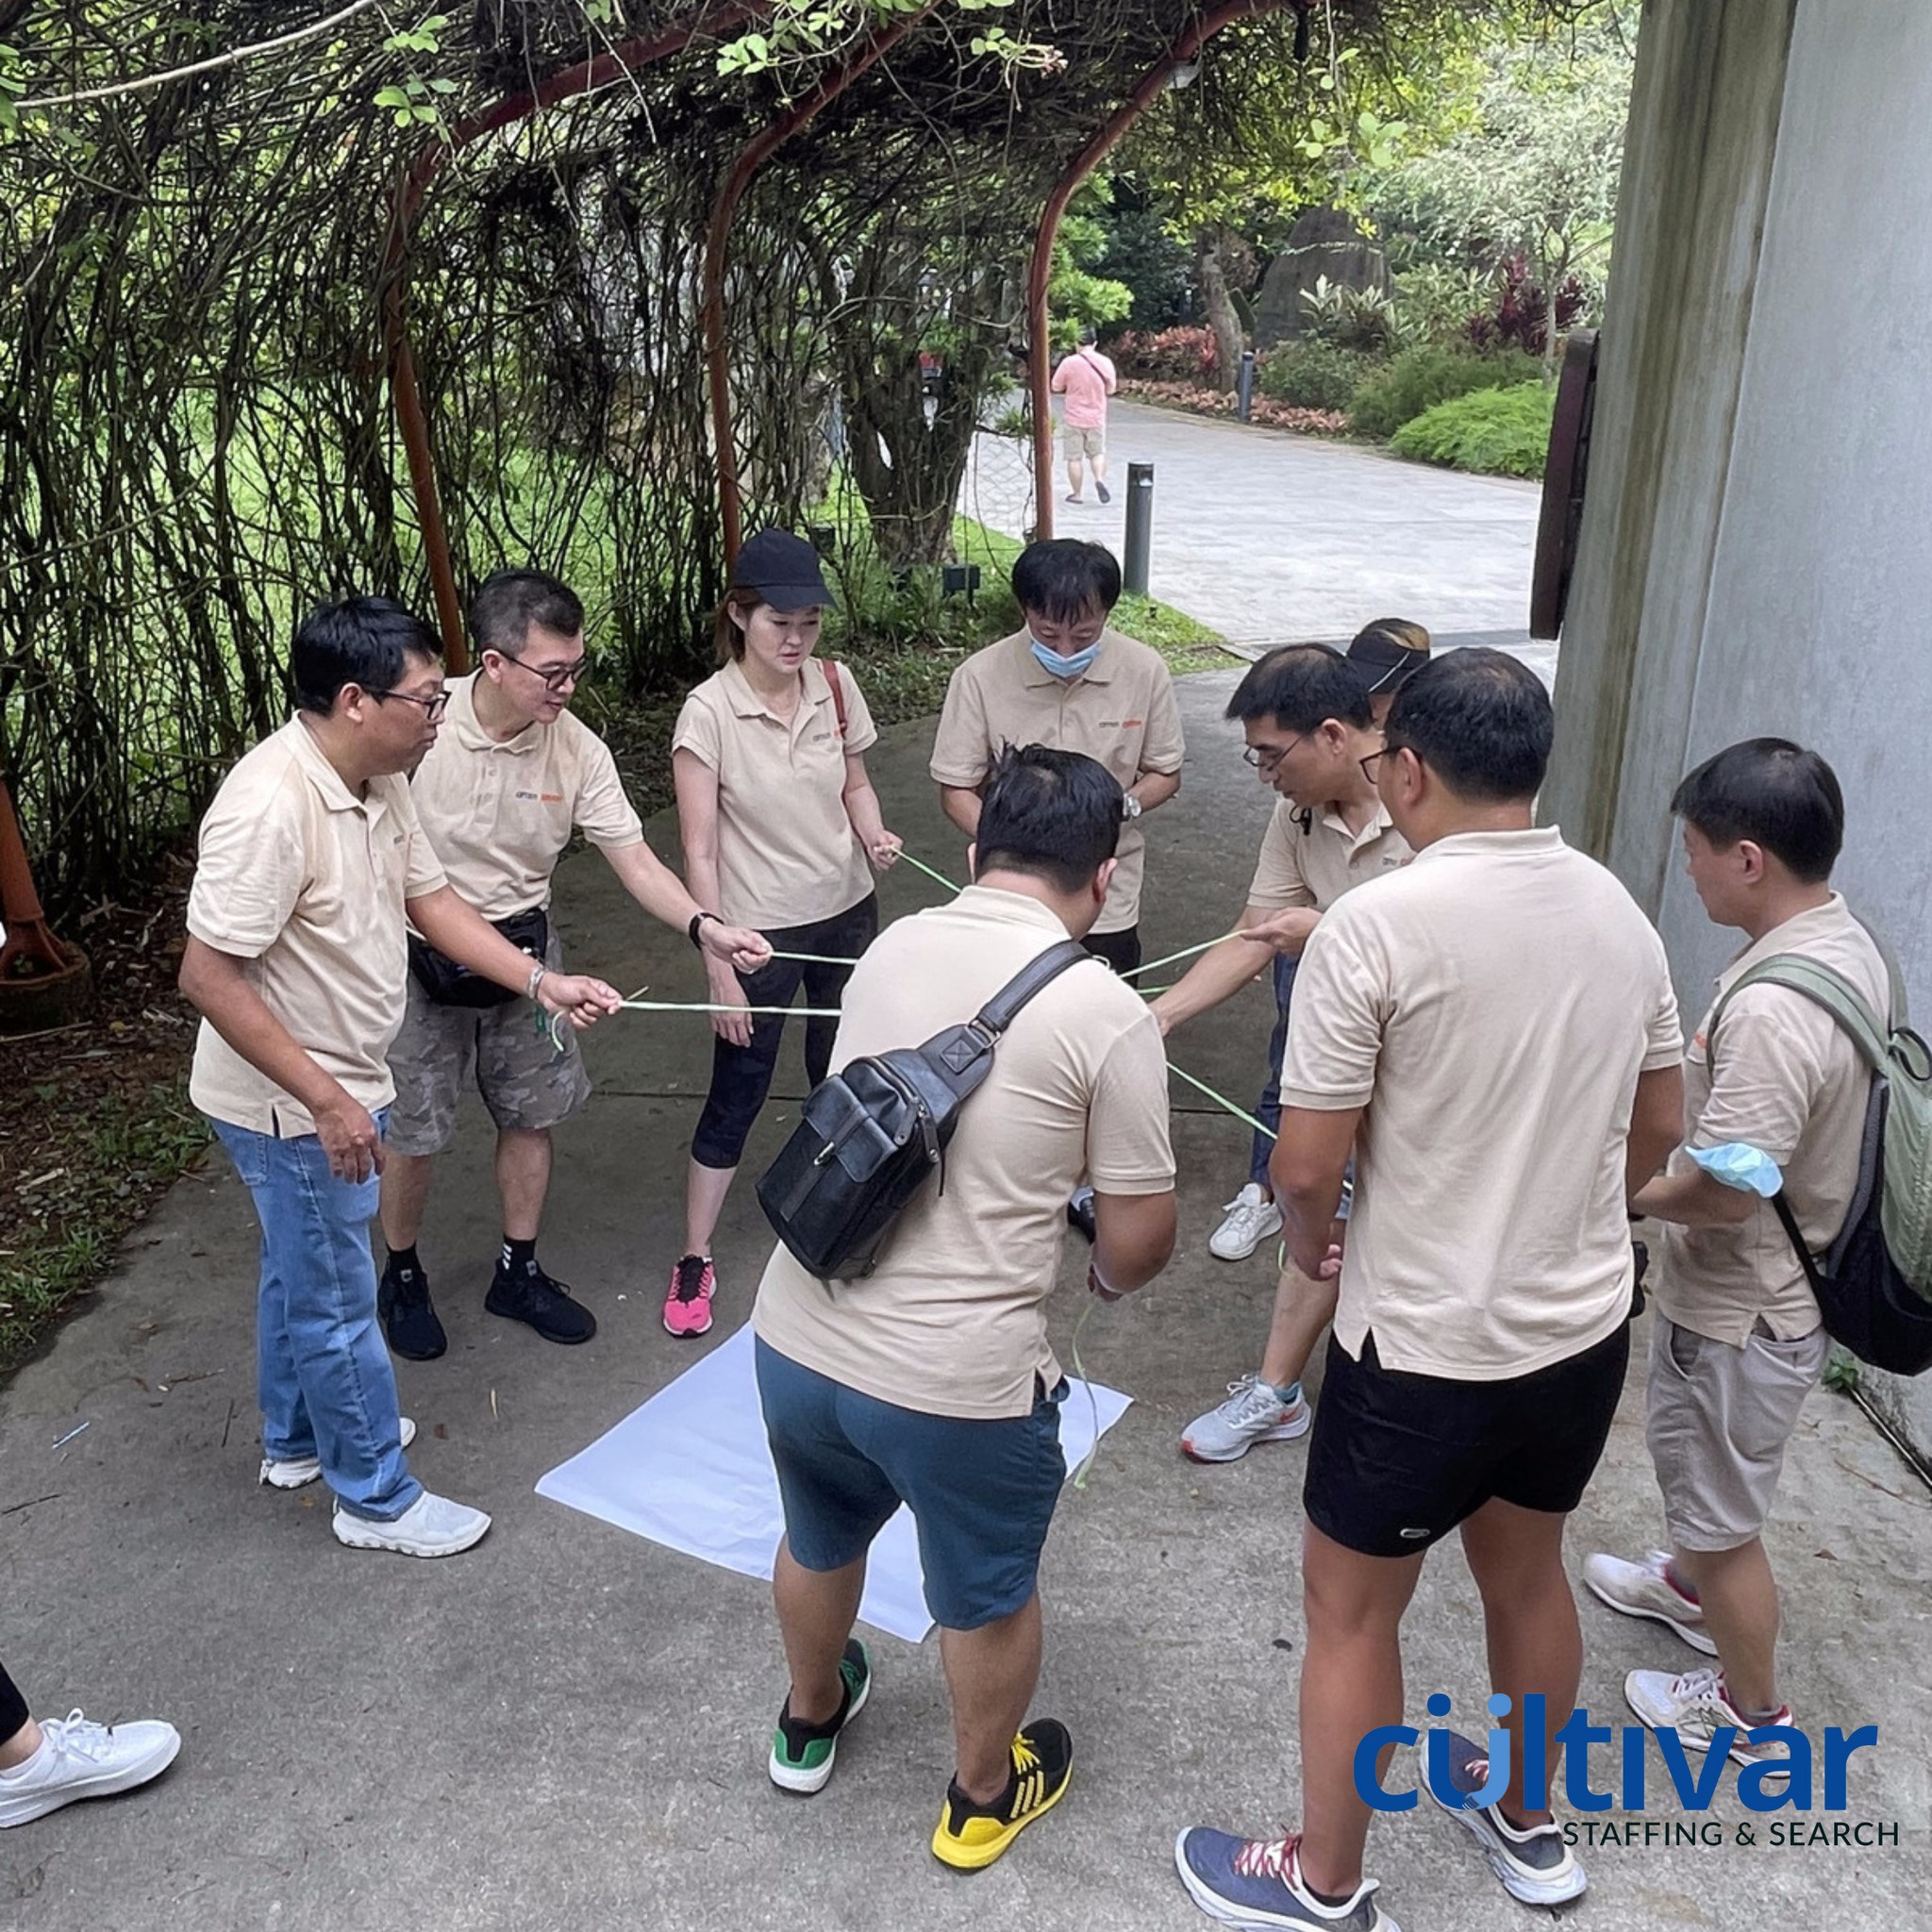 Temporary staffing for a corporate team building event at Gardens by the Bay, where Cultivar supported the event with 25 temporary staff. 